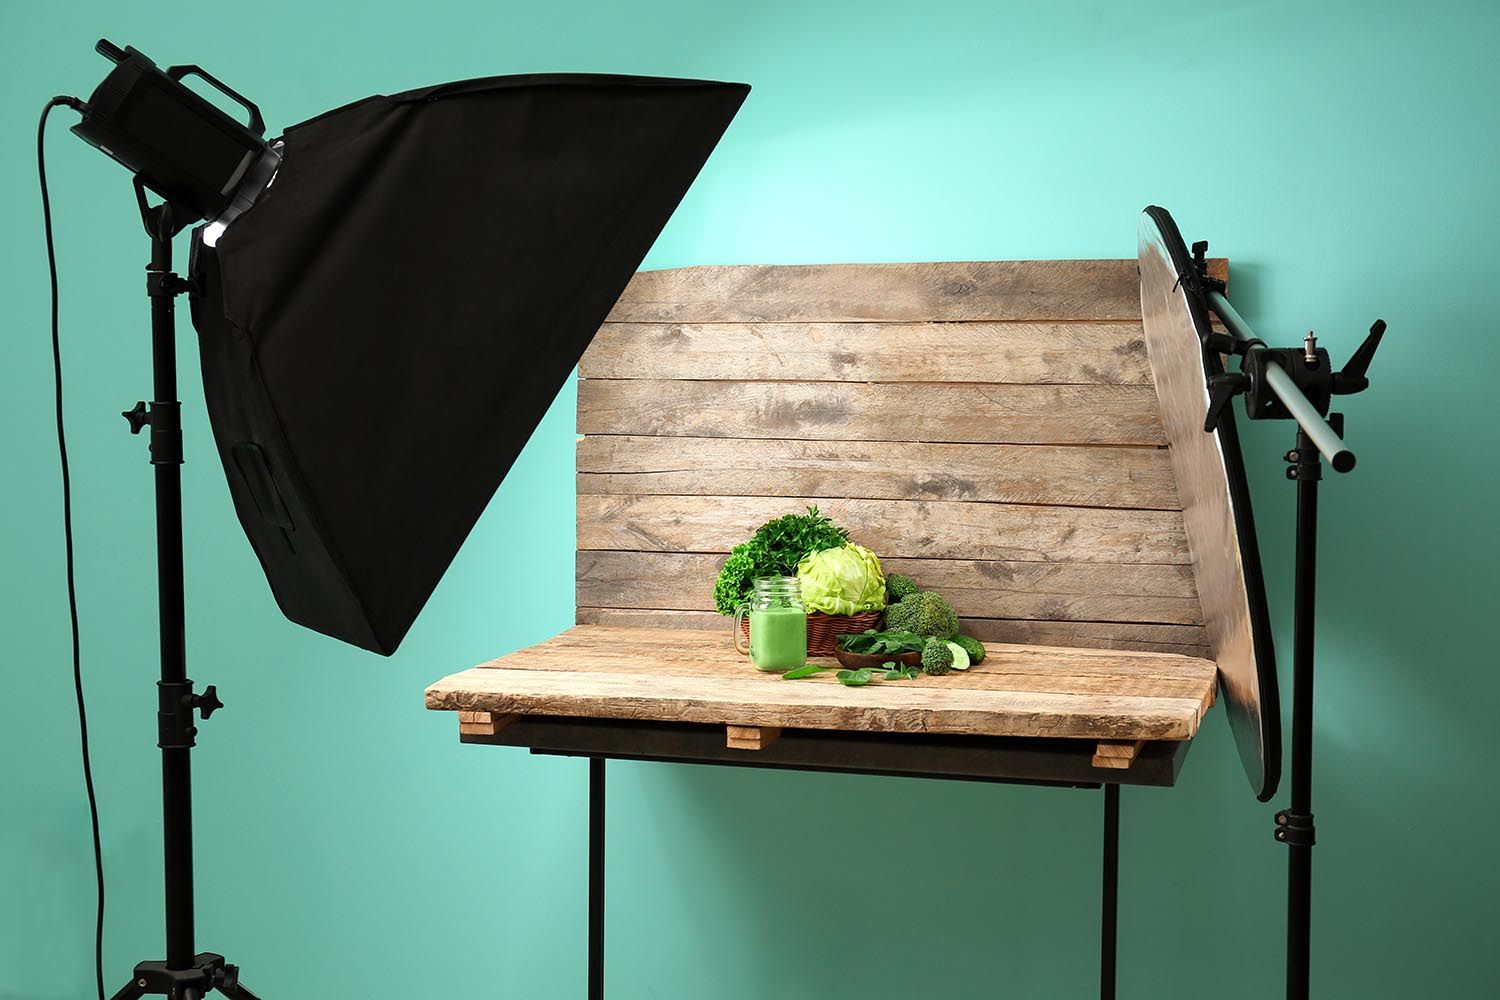 photography setup of cauliflower, Celery, Flat-leaf parsley, lettuce and green vegeable juice with Duo boards Photo by Africa Studio on shutterstock